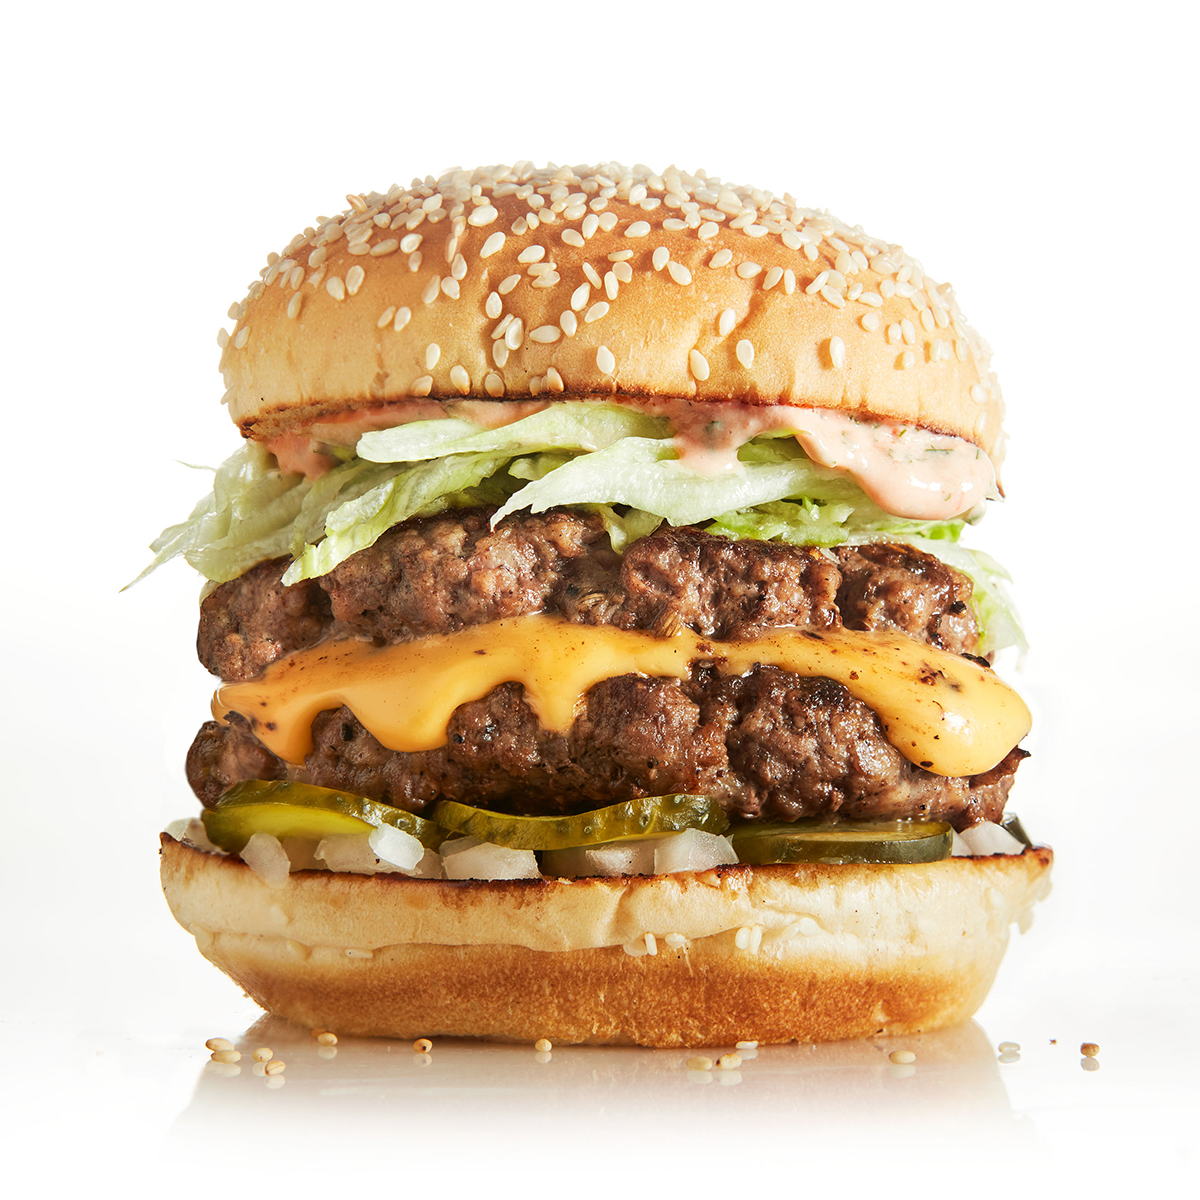 BURGER OF THE MONTH: Double Cheeseburgers with Special Ranch